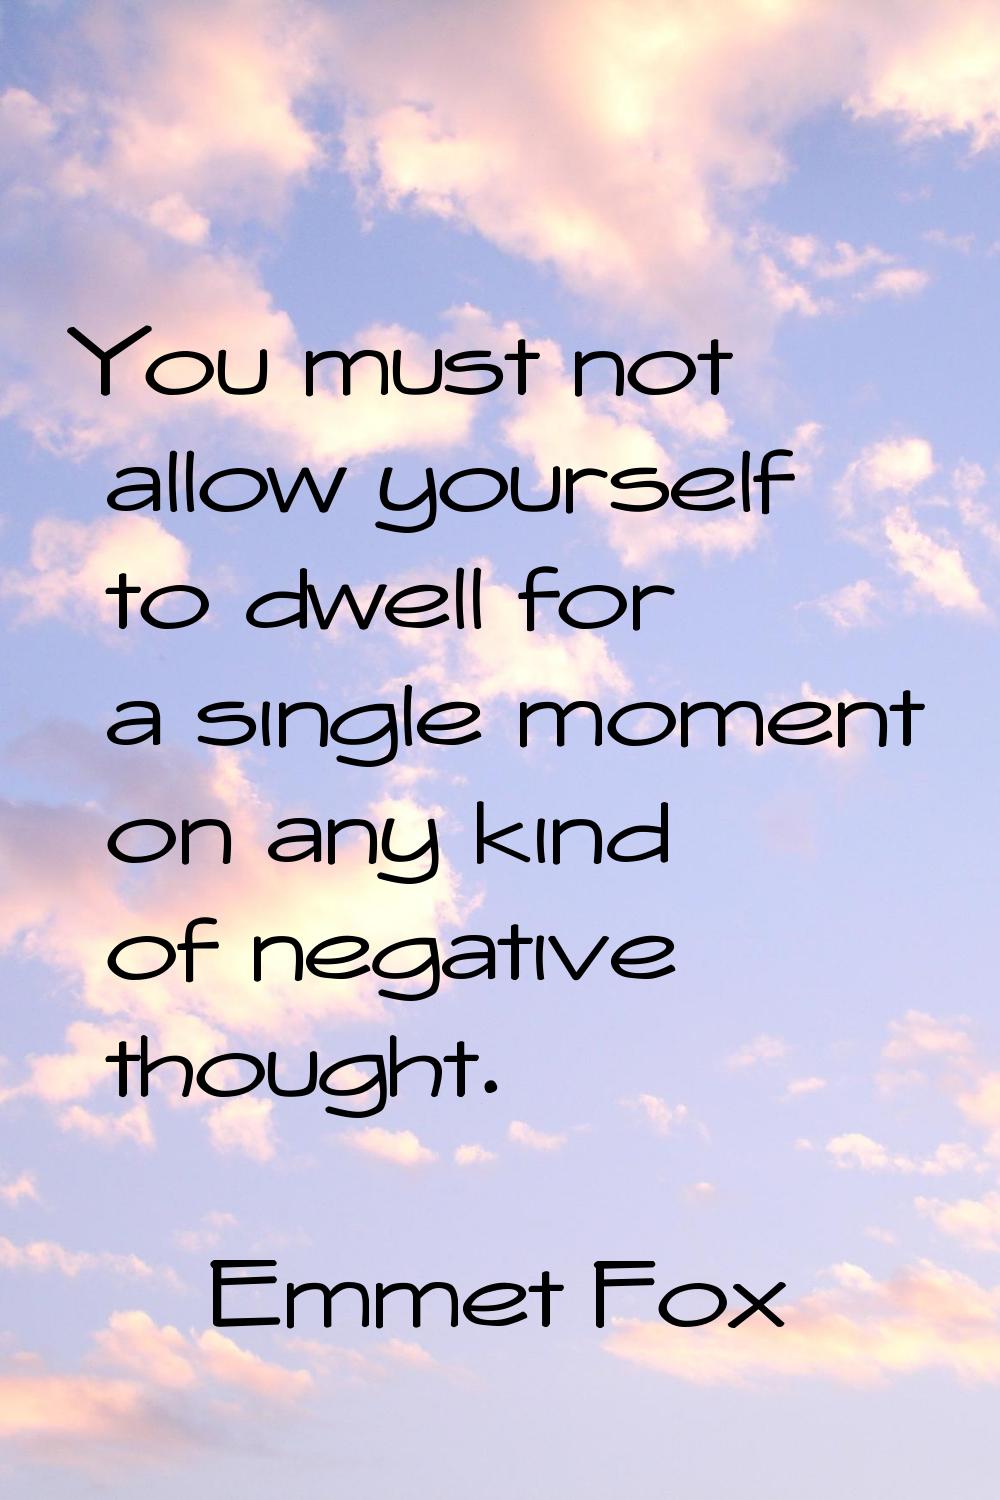 You must not allow yourself to dwell for a single moment on any kind of negative thought.